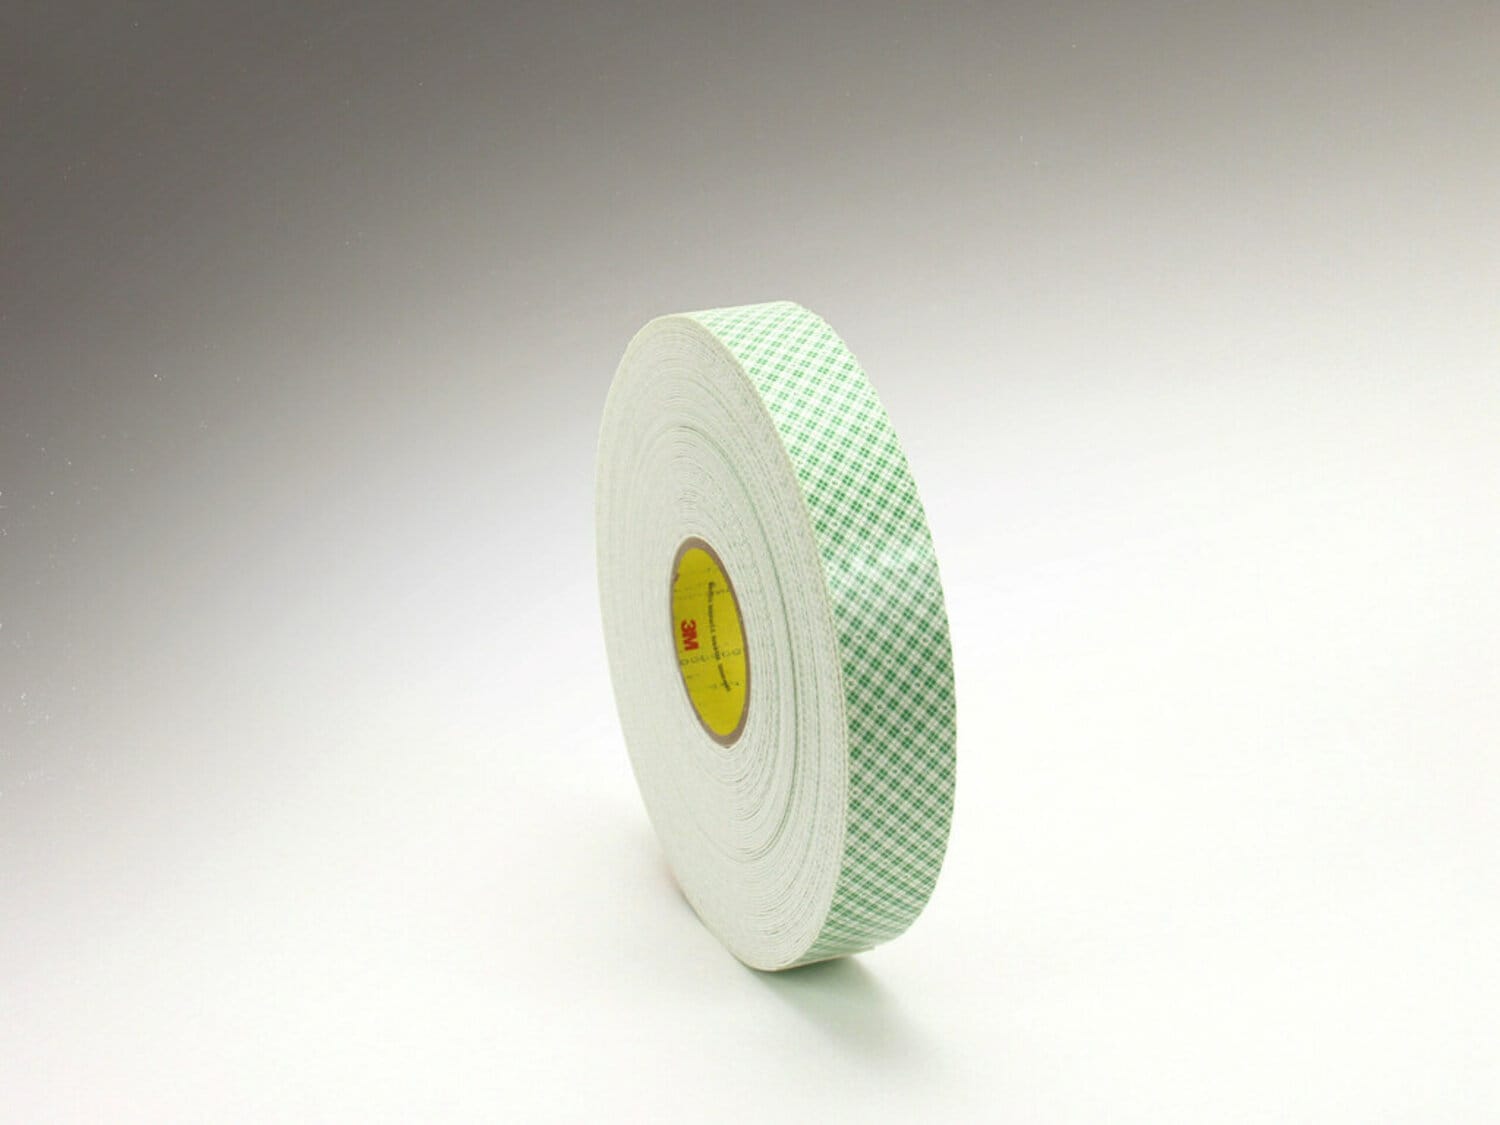 7010334404 - 3M Double Coated Urethane Foam Tape 4016, Off White, 1 in x 36 yd, 62
mil, Retail Pack, 9 rolls per case